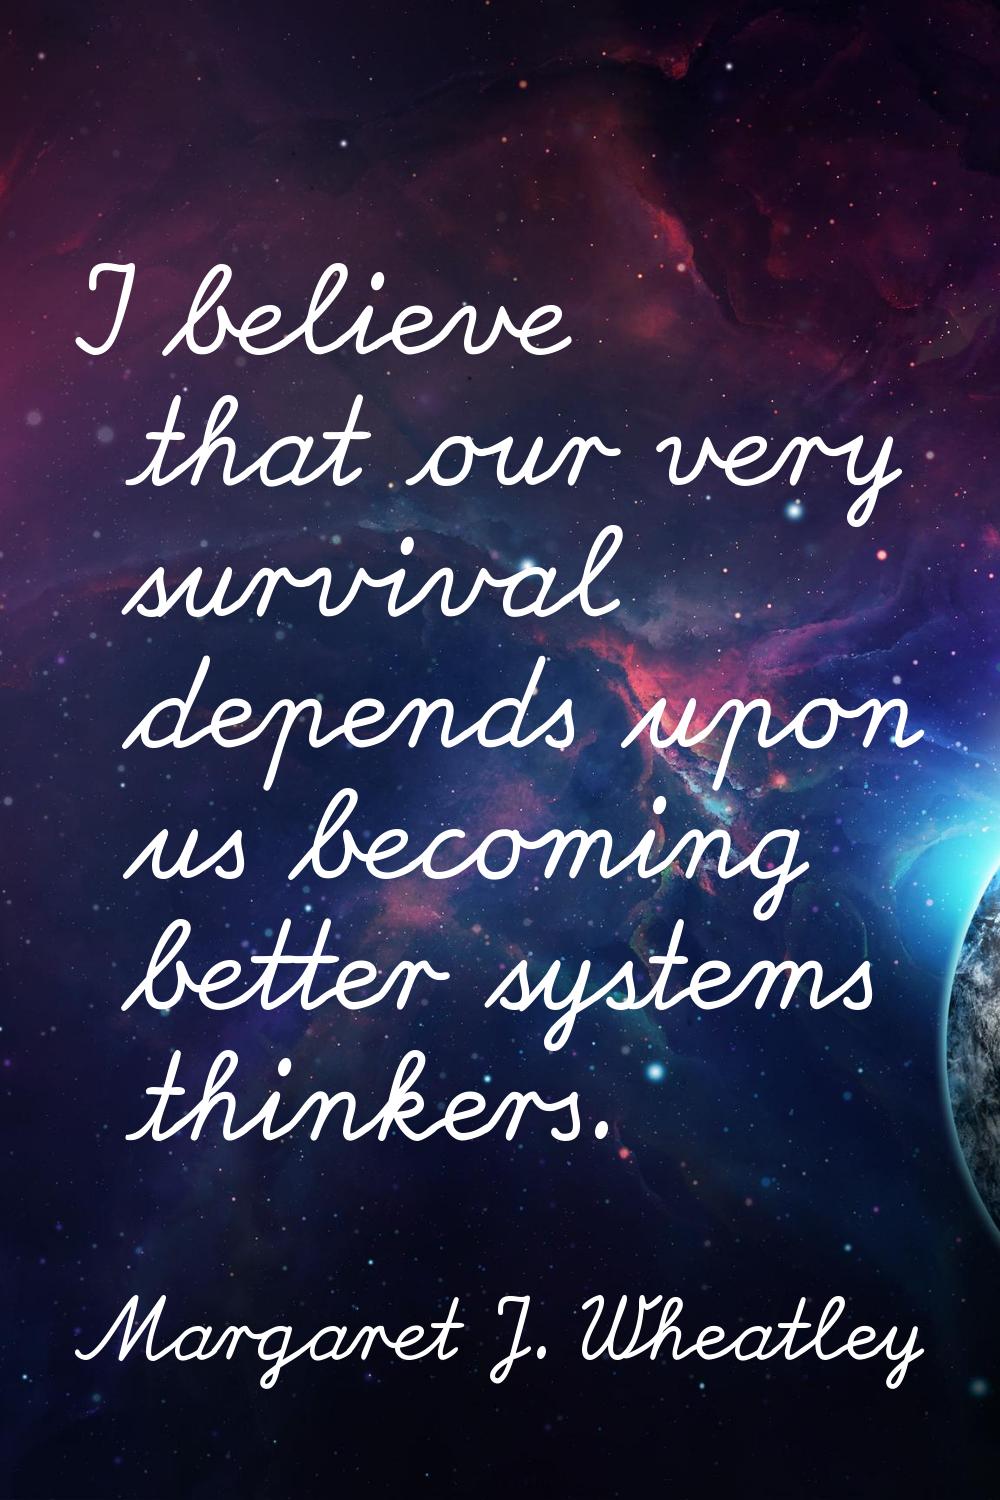 I believe that our very survival depends upon us becoming better systems thinkers.